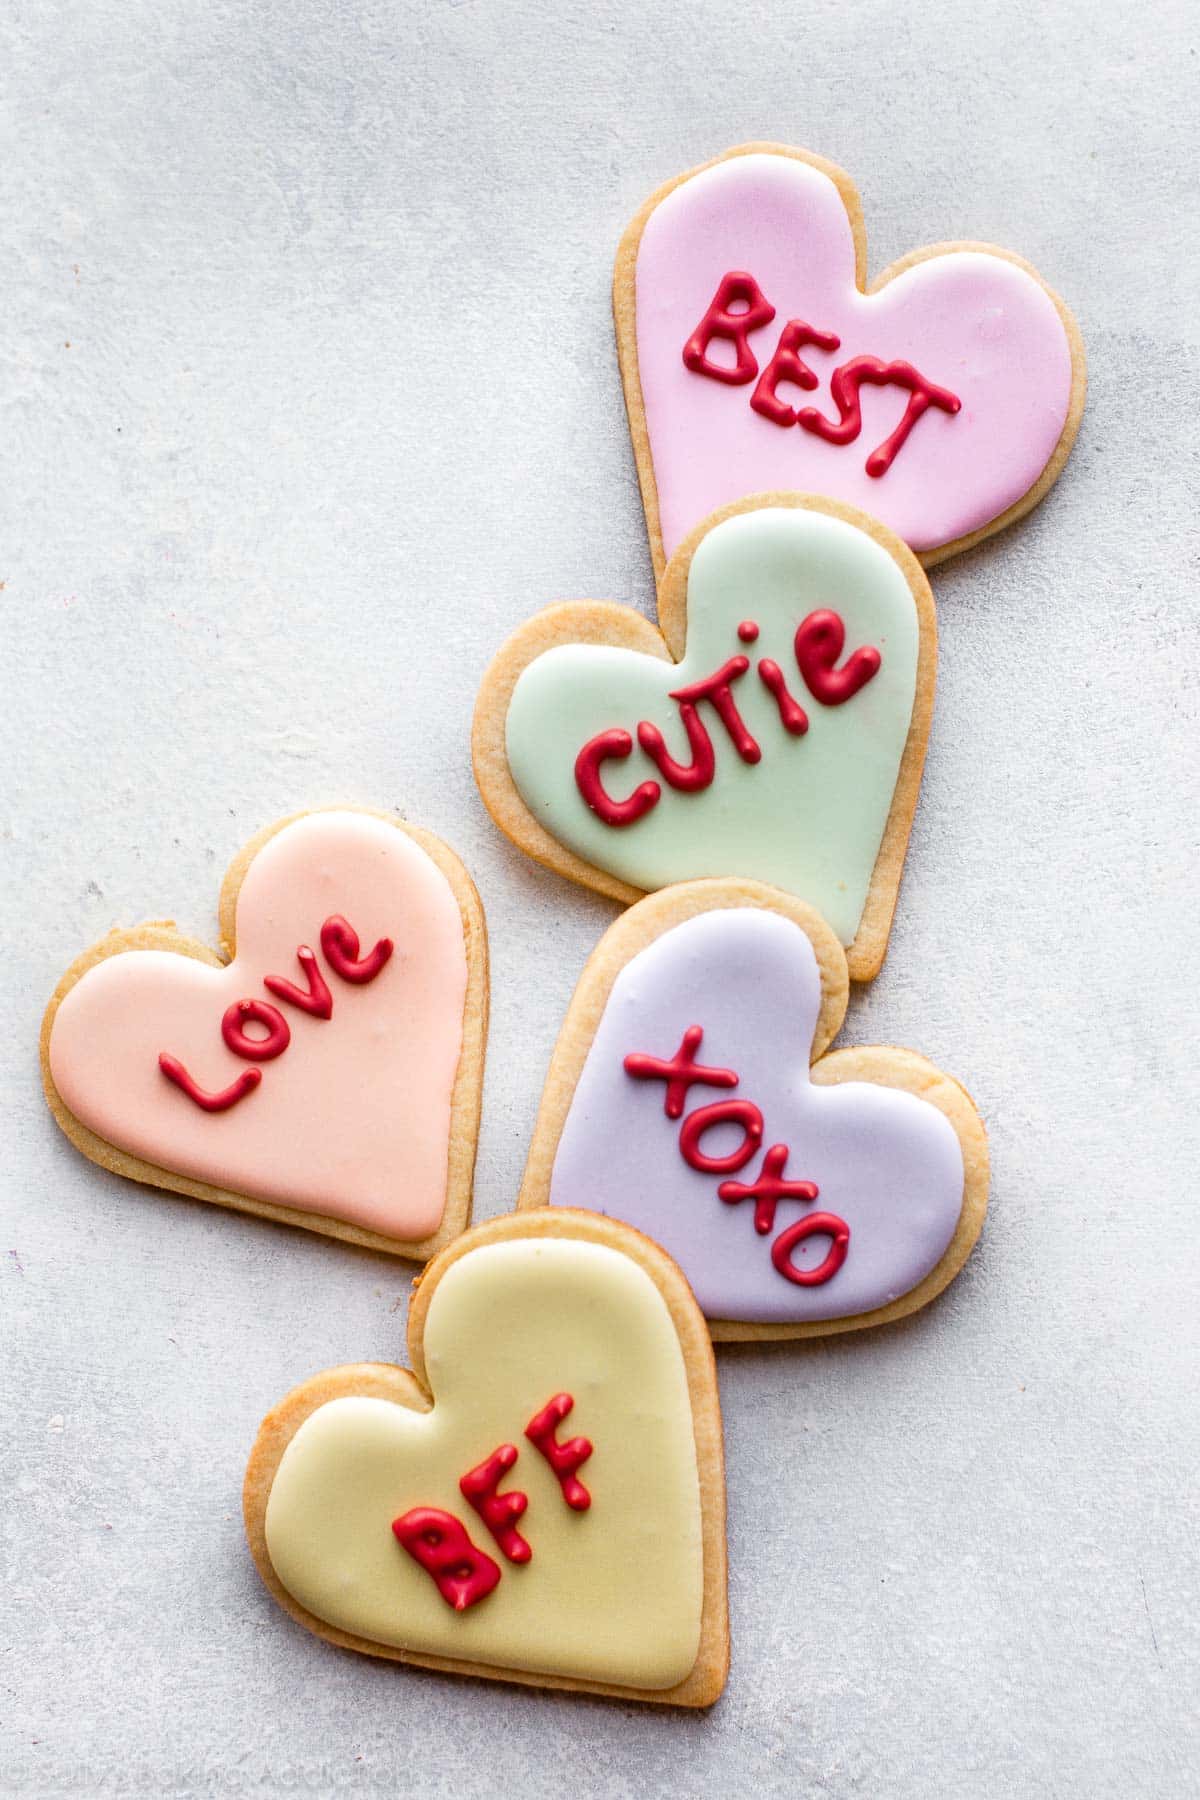 conversation heart sugar cookies with colorful royal icing